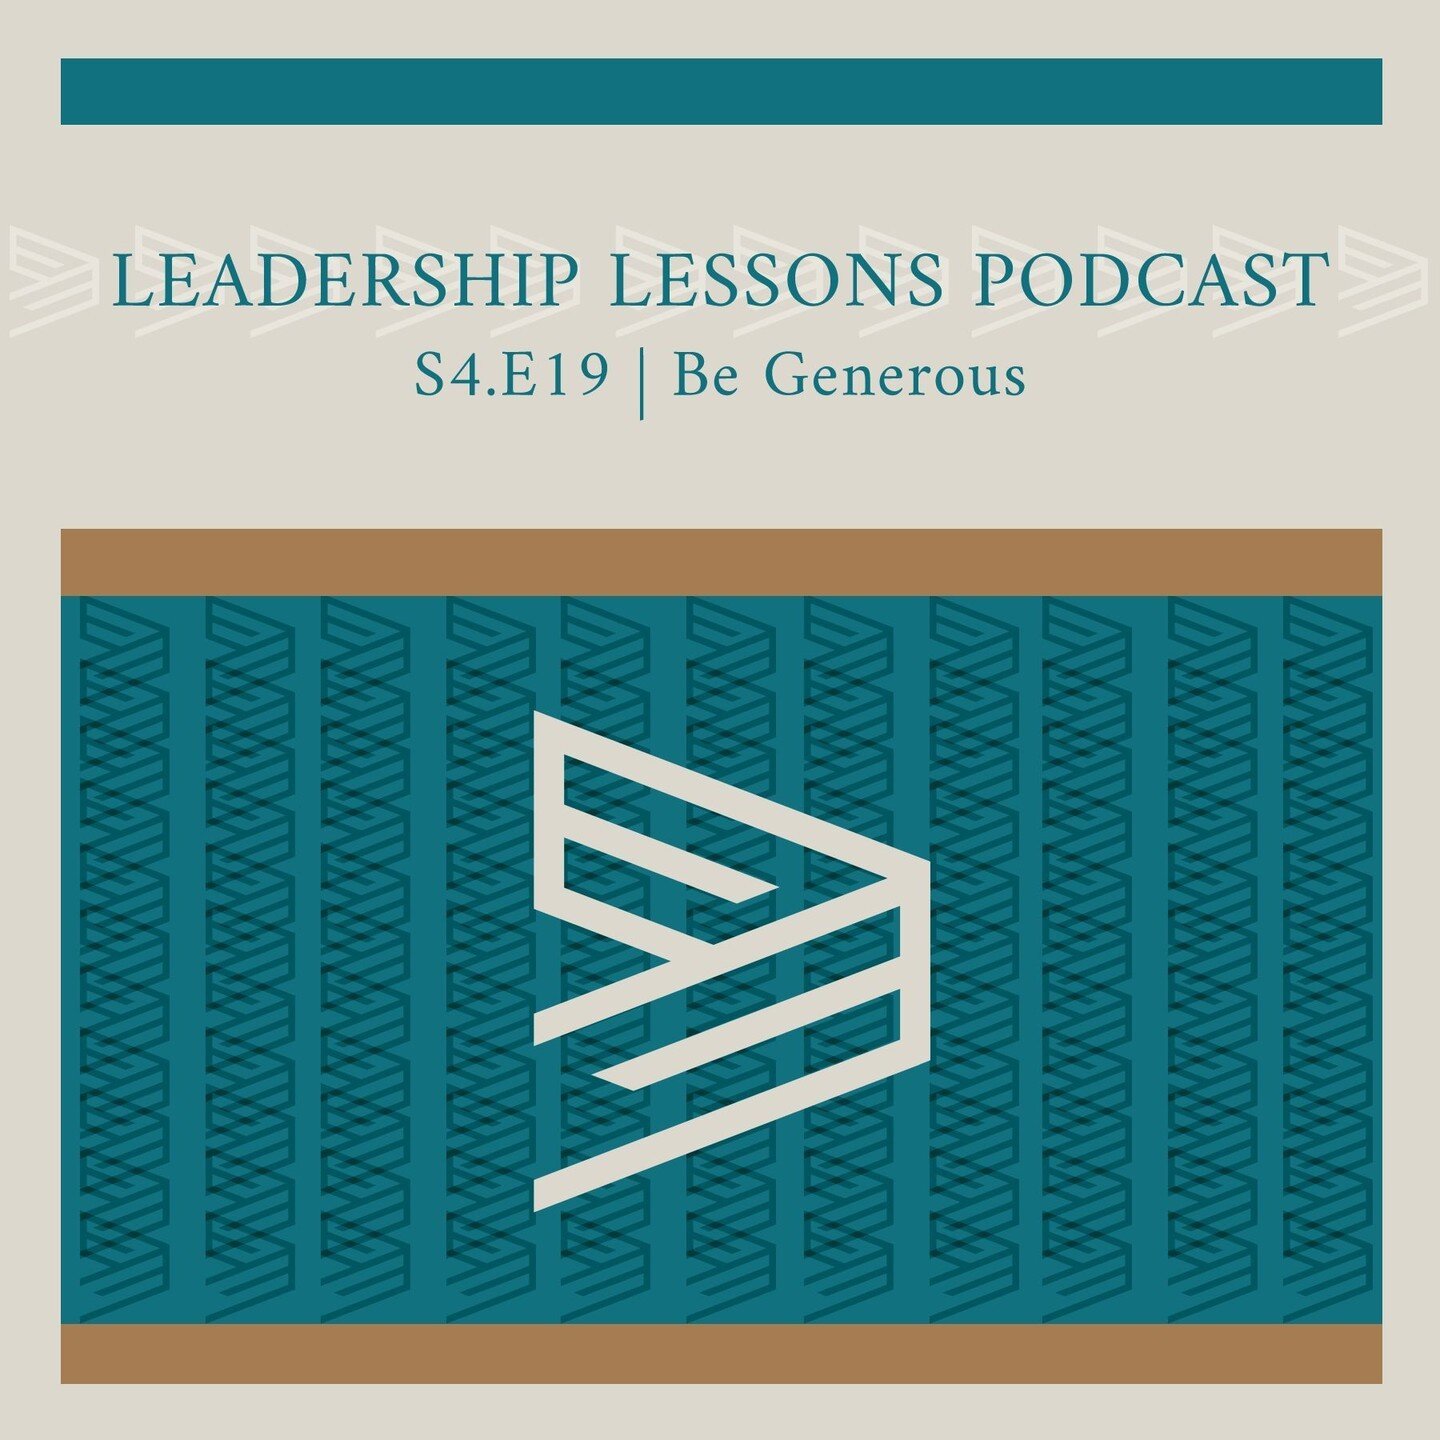 EE Leaders | Leadership Lessons Podcasts Season 4 Episode 19 - Being Generous

In this week&rsquo;s episode from Nehemiah 5:14-19, Pastor Daniel answers the question: What does it look like to be a generous leader? Nehemiah sets the example here by b